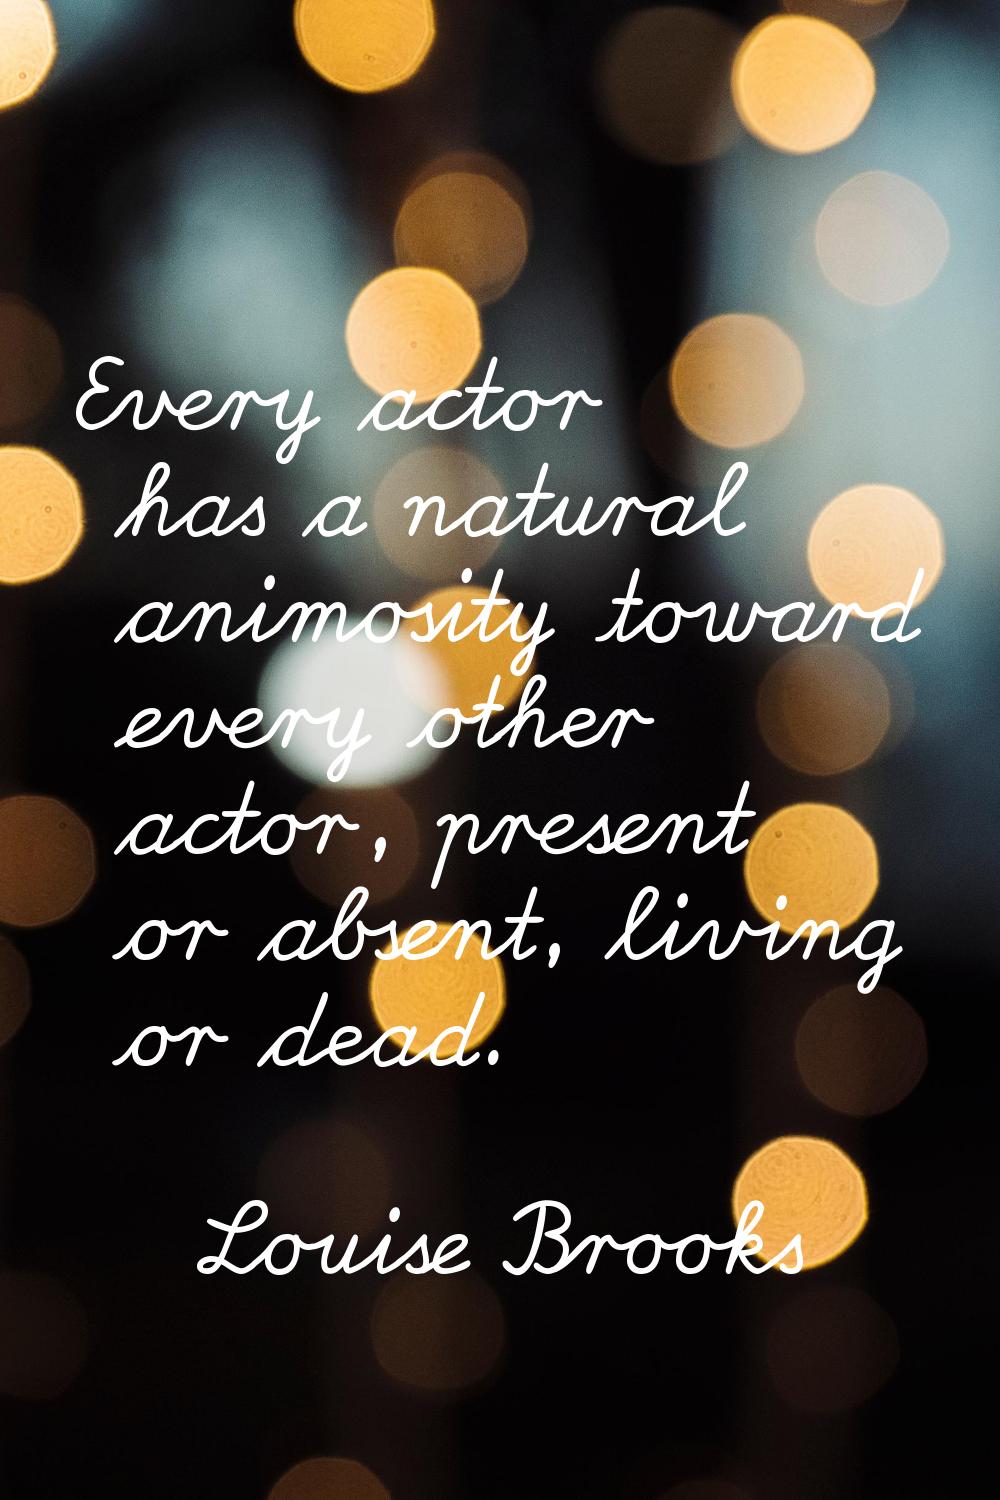 Every actor has a natural animosity toward every other actor, present or absent, living or dead.